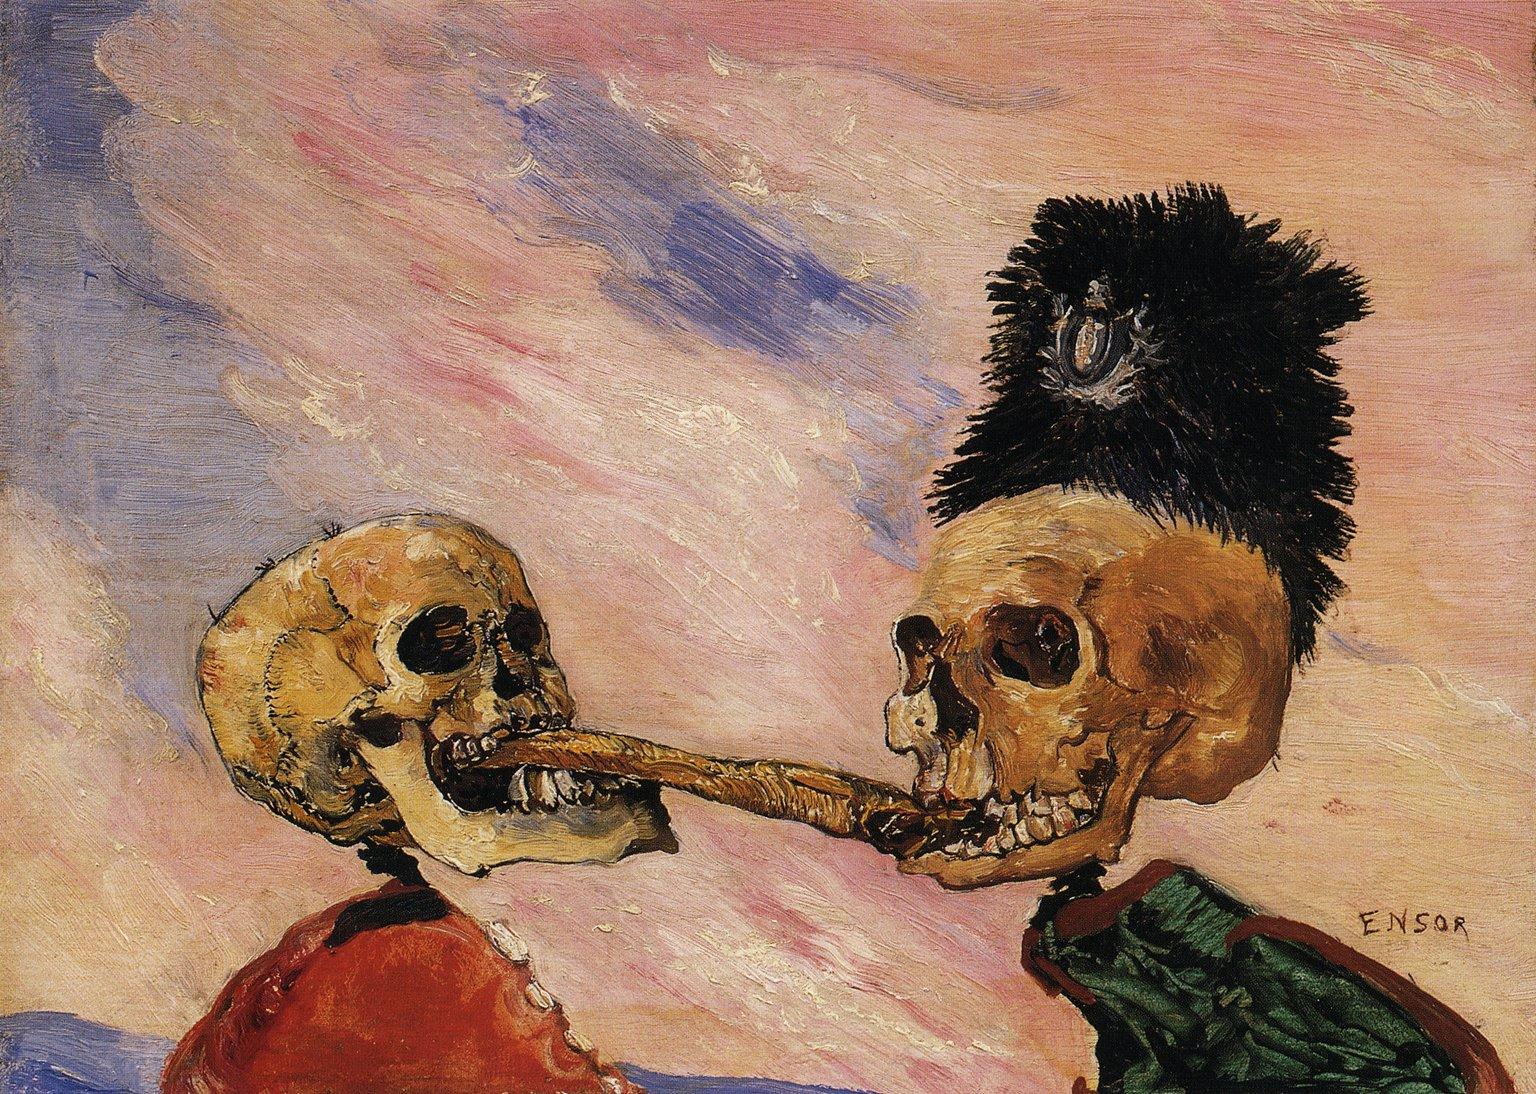 Skeletons Fighting over a Pickled Herring by James Ensor - 1891 - 16 x 21.5 cm The Royal Museums of Fine Arts of Belgium